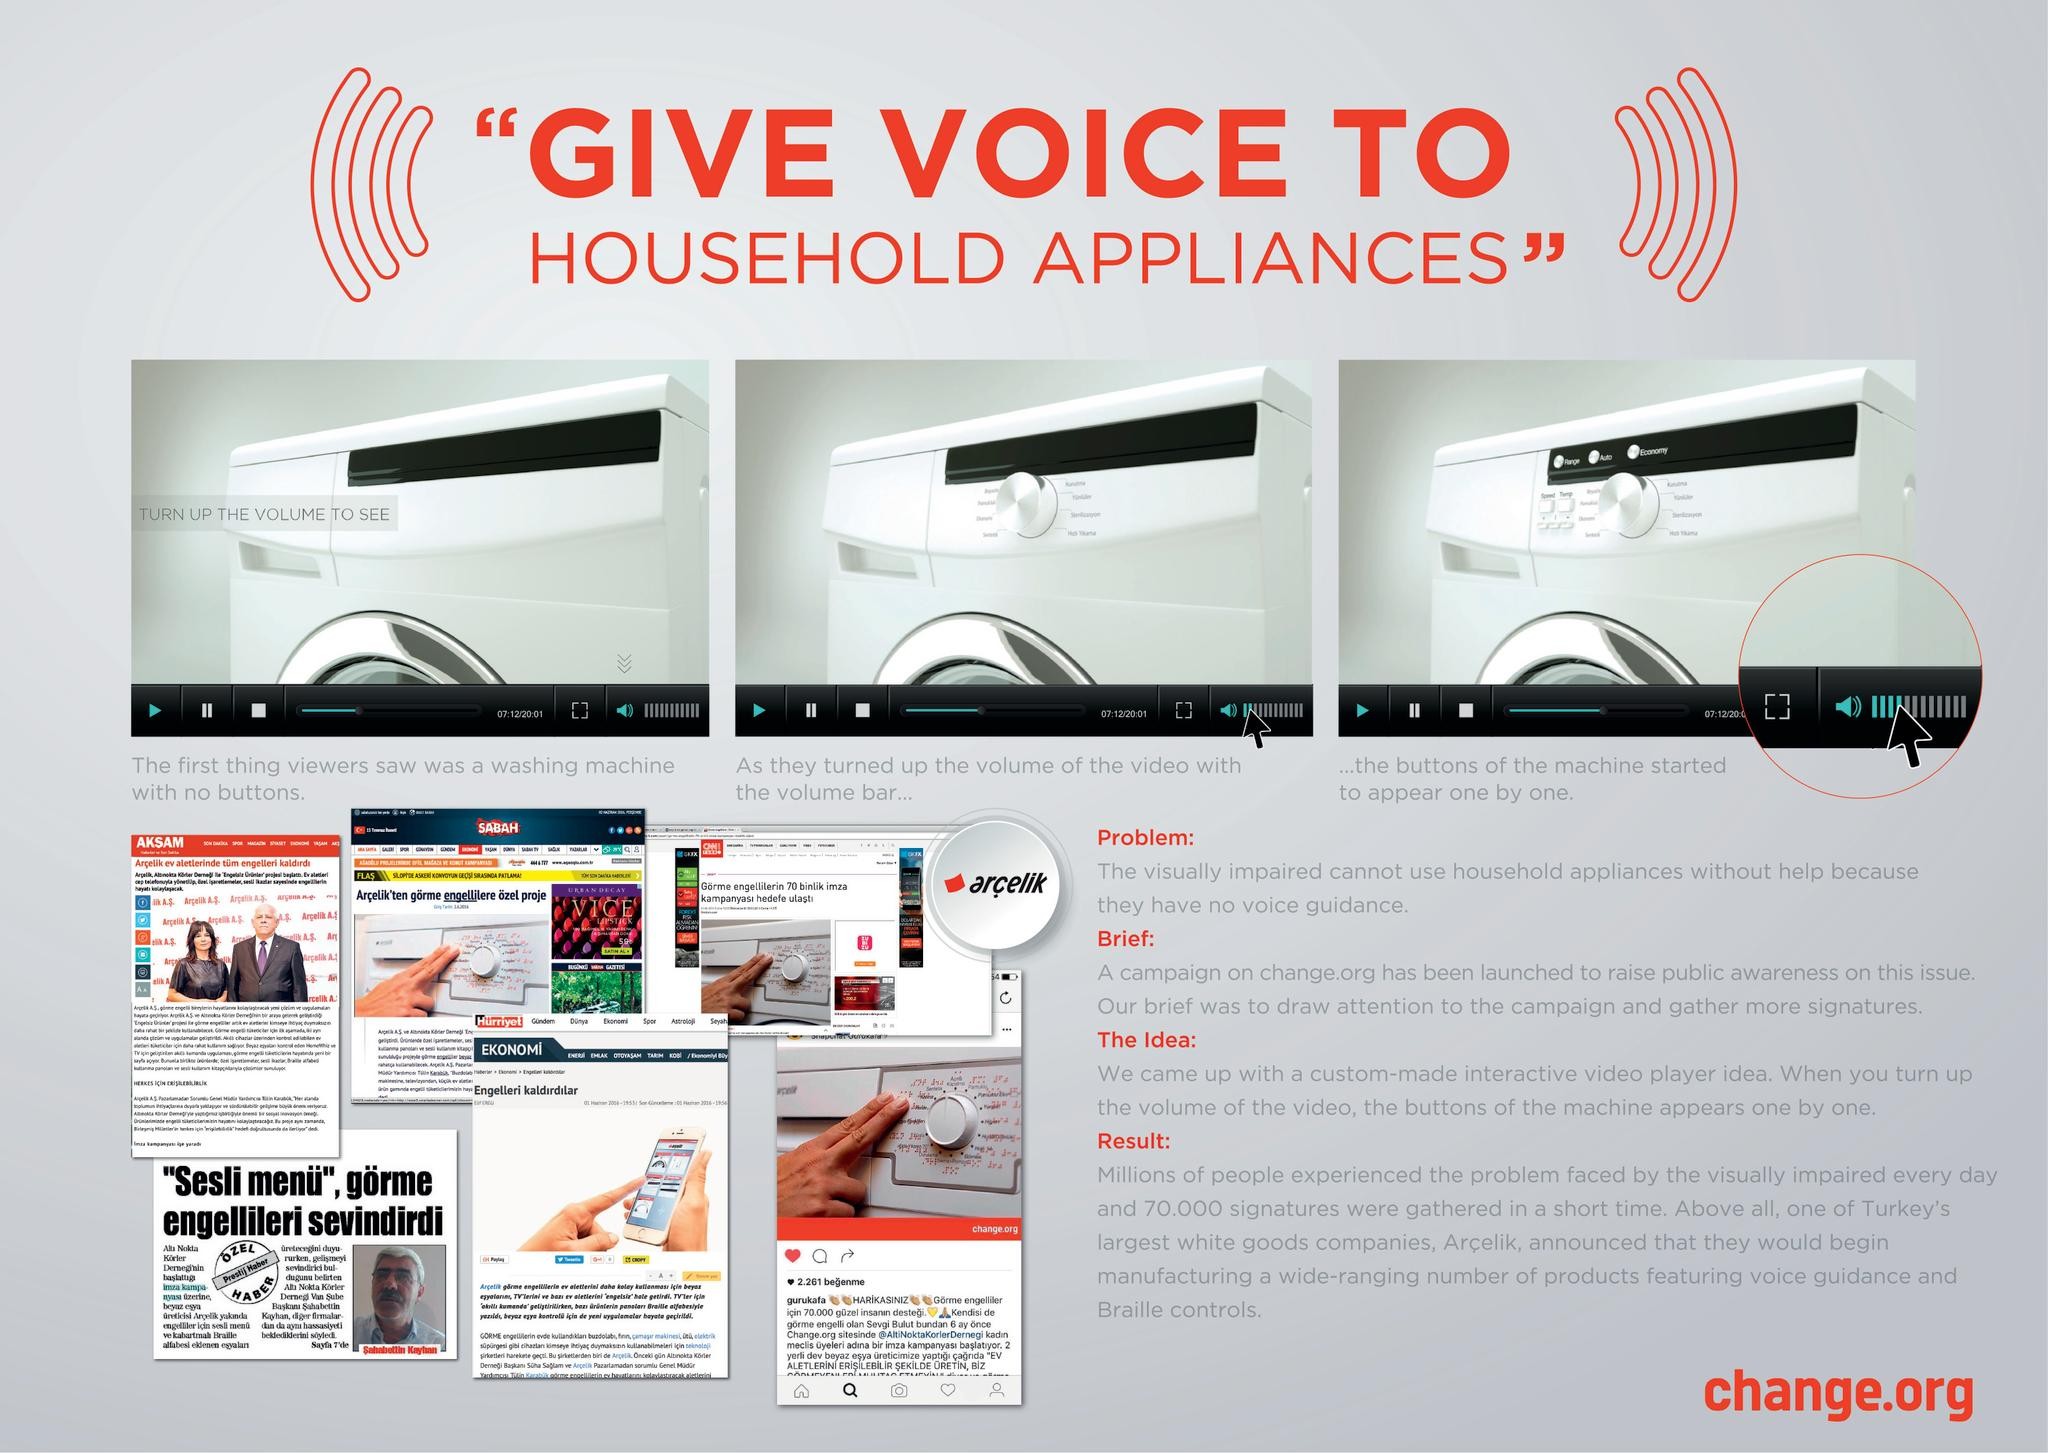 GIVE VOICE TO HOUSEHOLD APPLIANCES